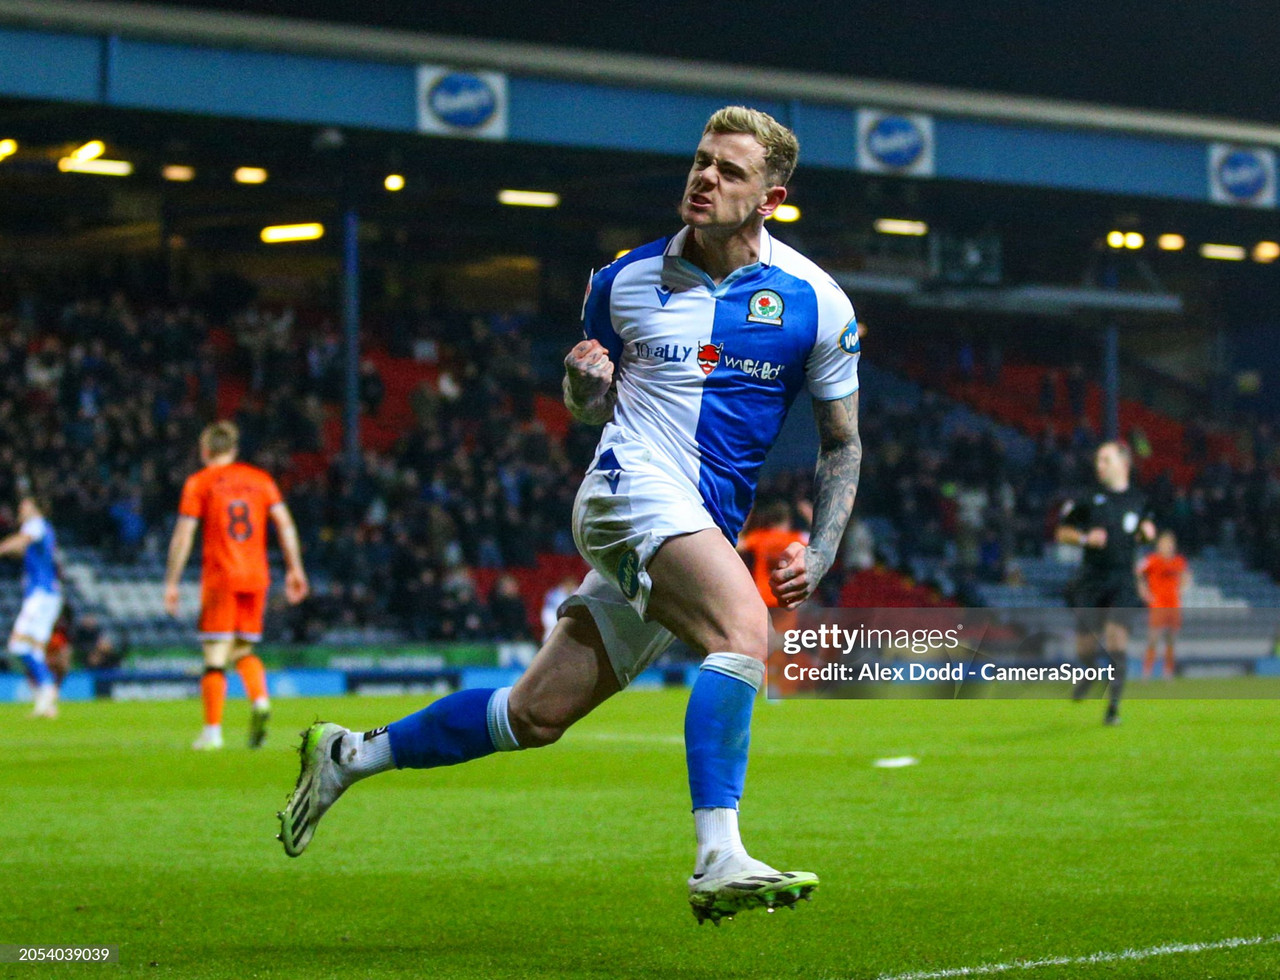 Blackburn Rovers 1-1 Millwall: Szmodics comes to Rovers' rescue once again